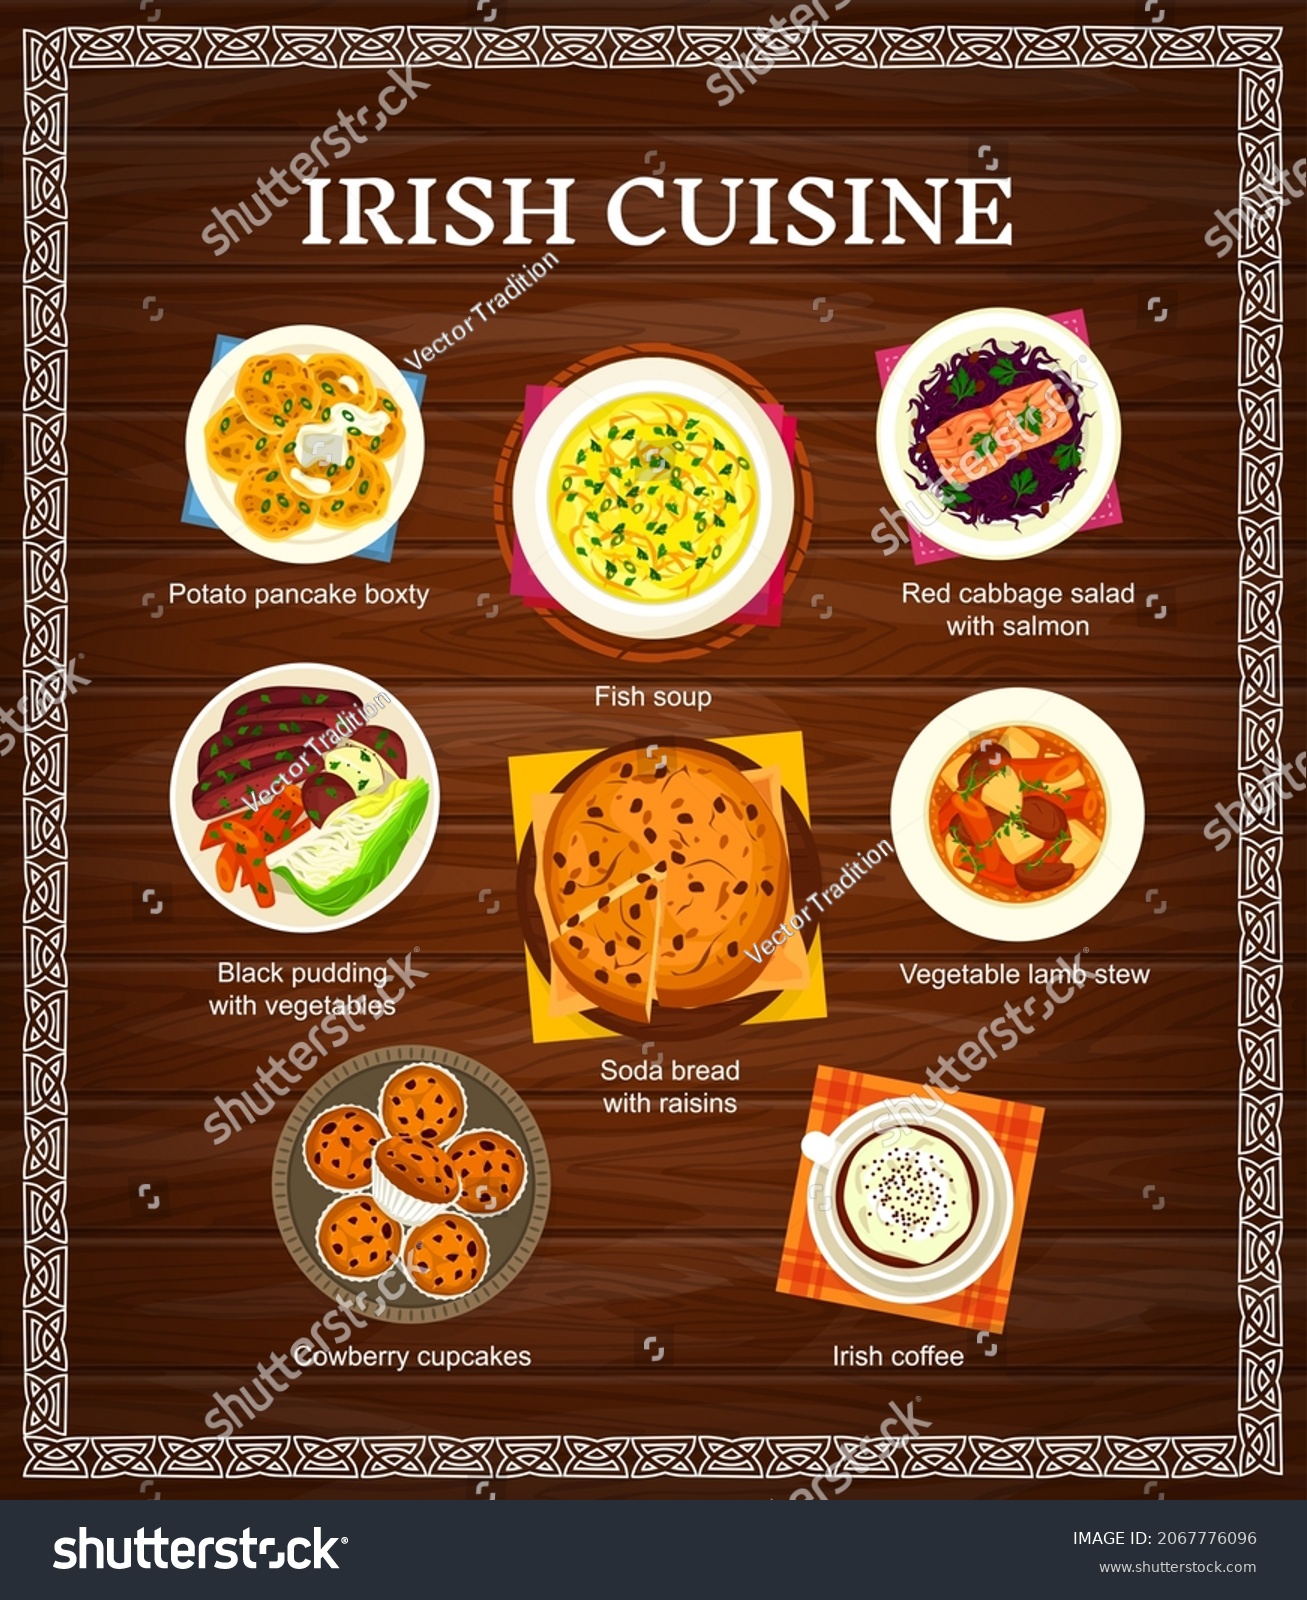 SVG of Irish cuisine vector menu potato pancake boxty, fish soup and soda bread with raisins. Cowberry cupcakes, lamb stew and black pudding with vegetables. Red cabbage salad with salmon and coffee meals svg